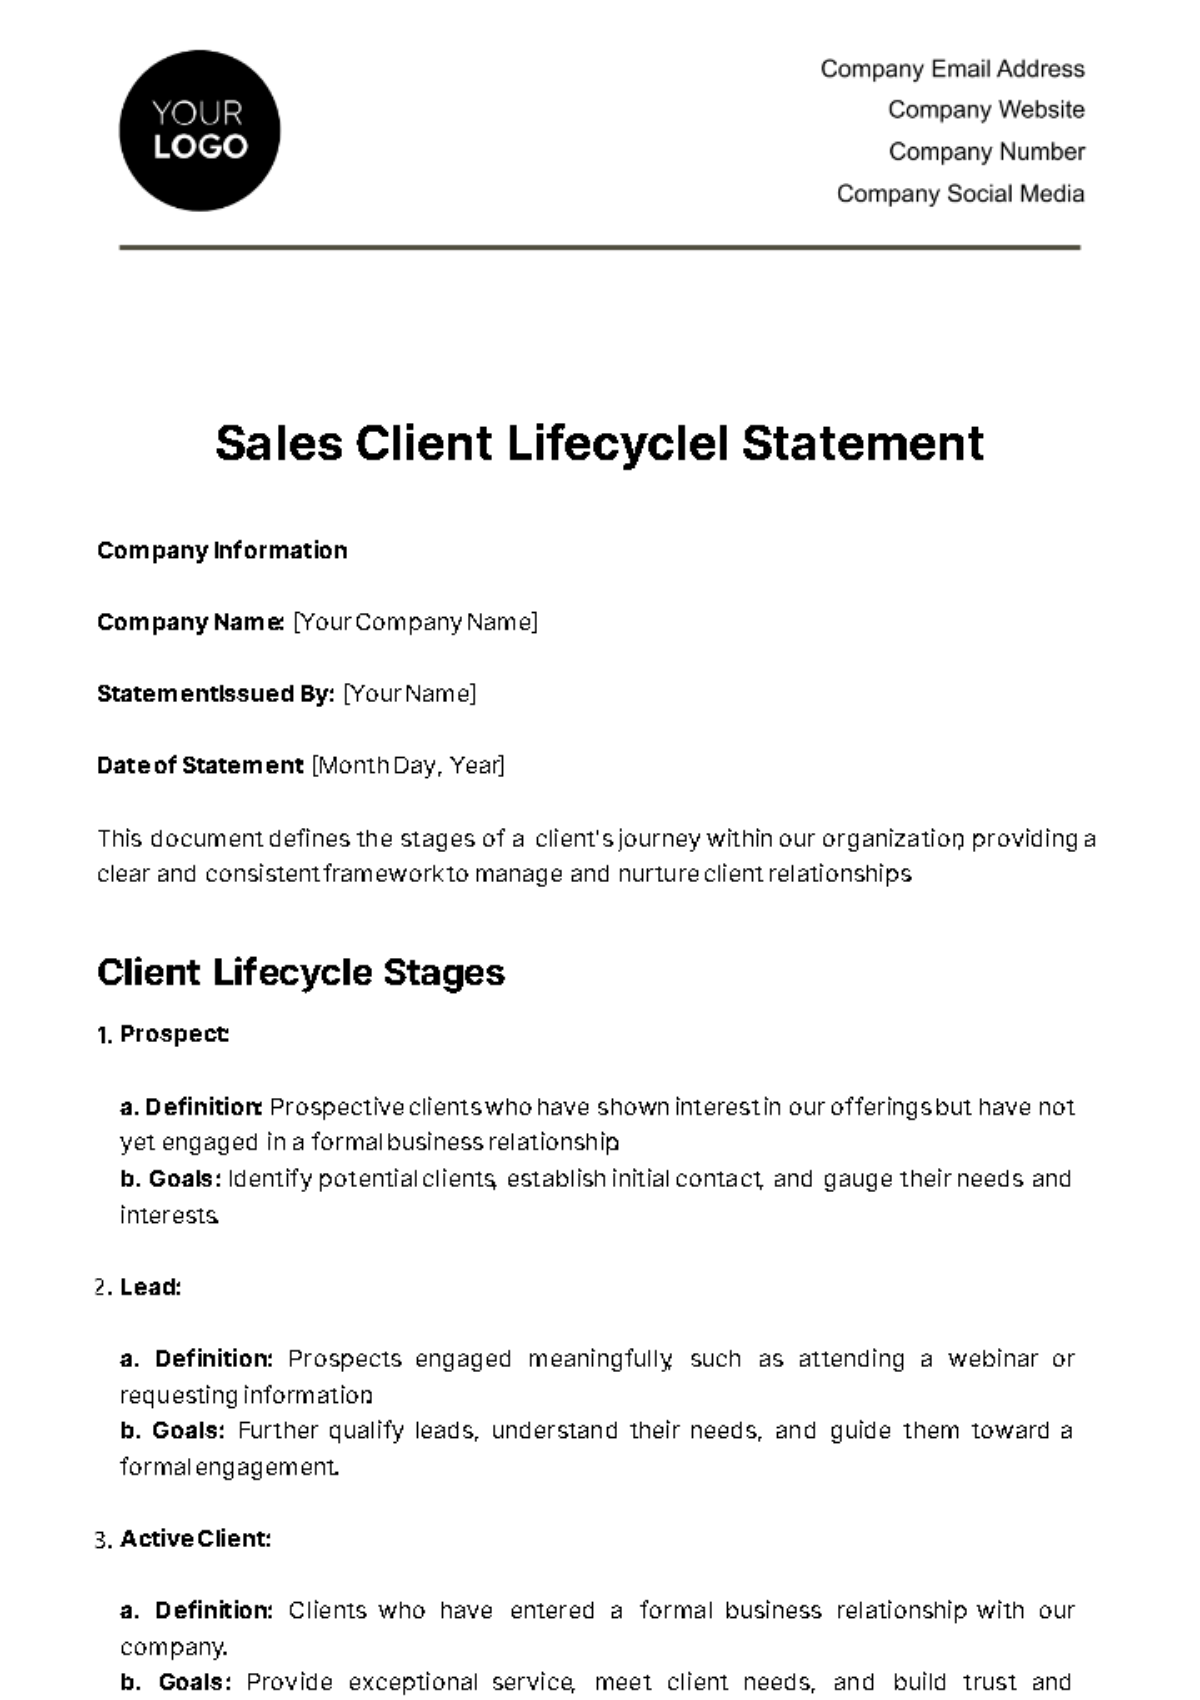 Free Sales Client Lifecycle Statement Template